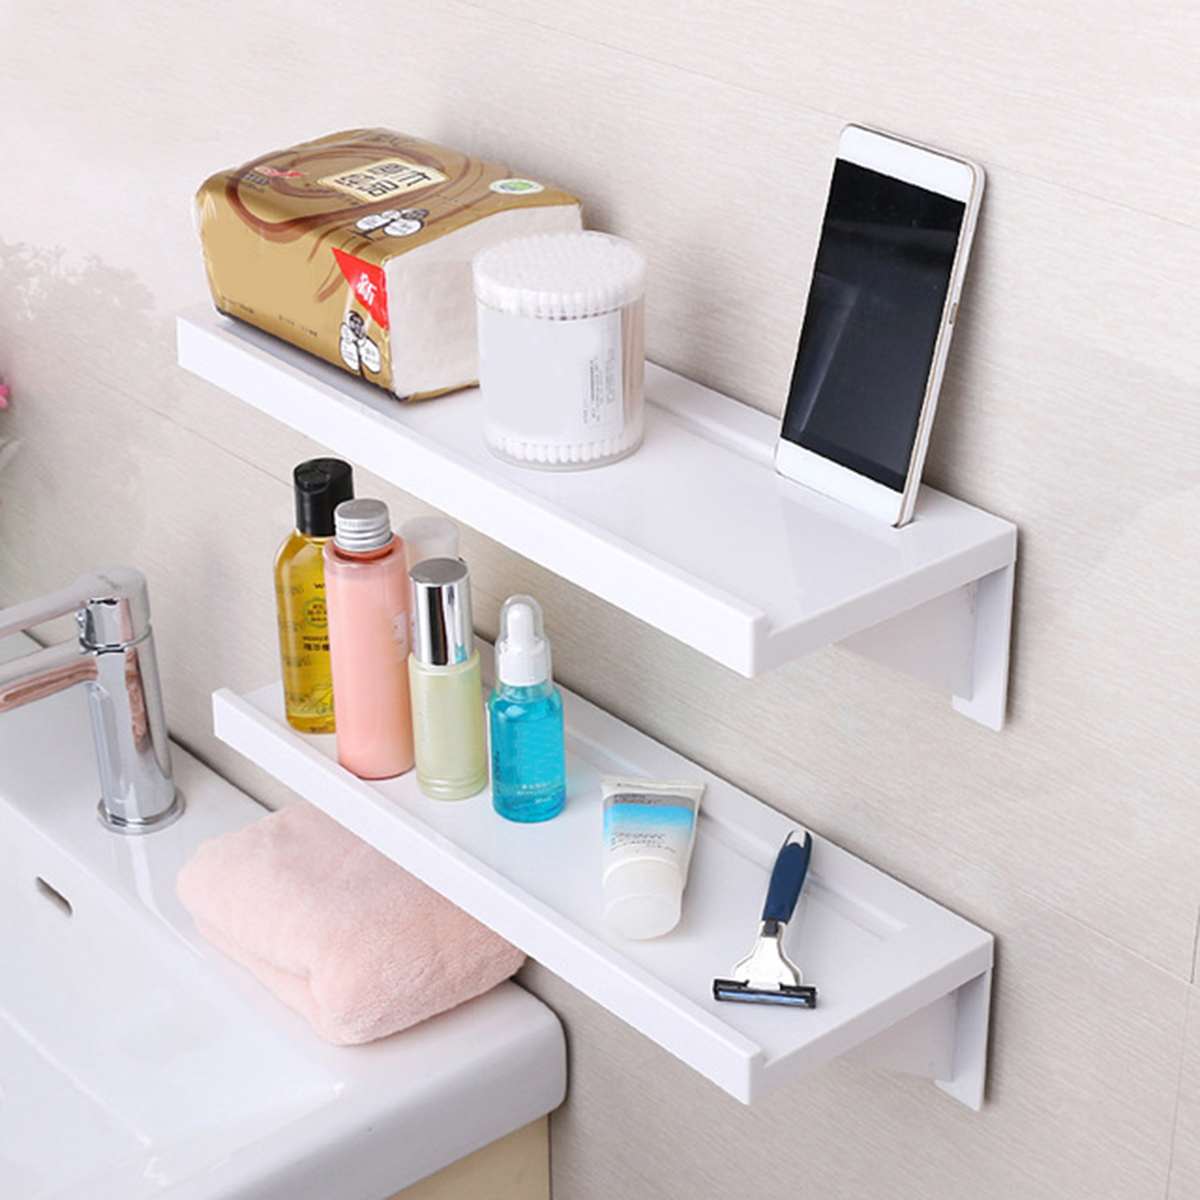 Multifunctional Plastic Bathroom Suction Storage Shelf With Double Suction  For Wall Organization Included From Ldd2016, $8.05